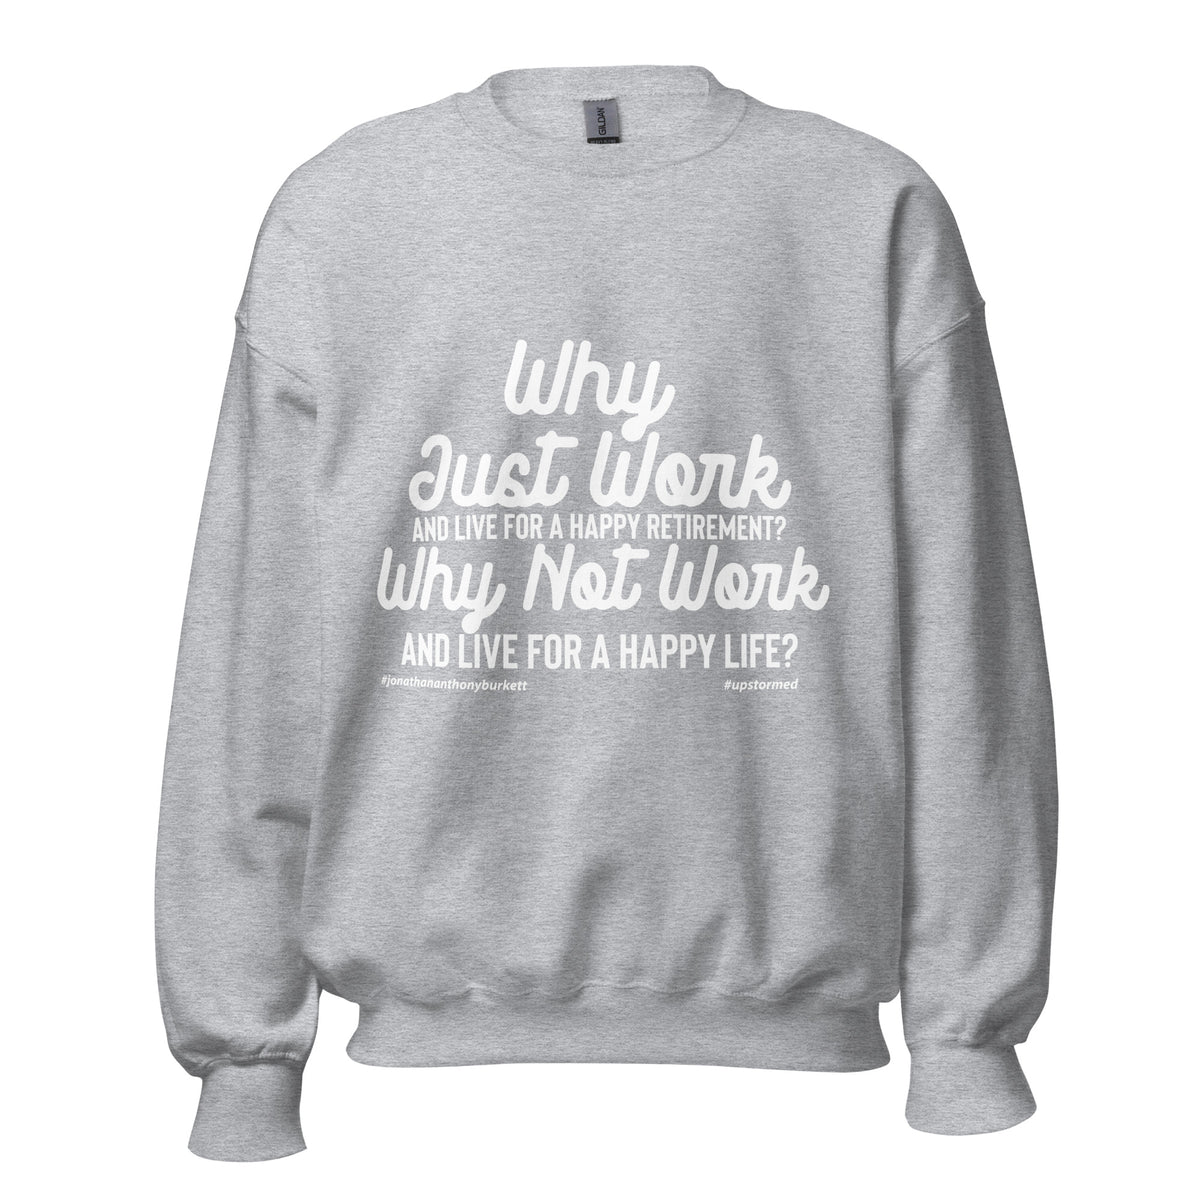 Why Just Work And Live For A Happy Retirement Upstormed Sweatshirt